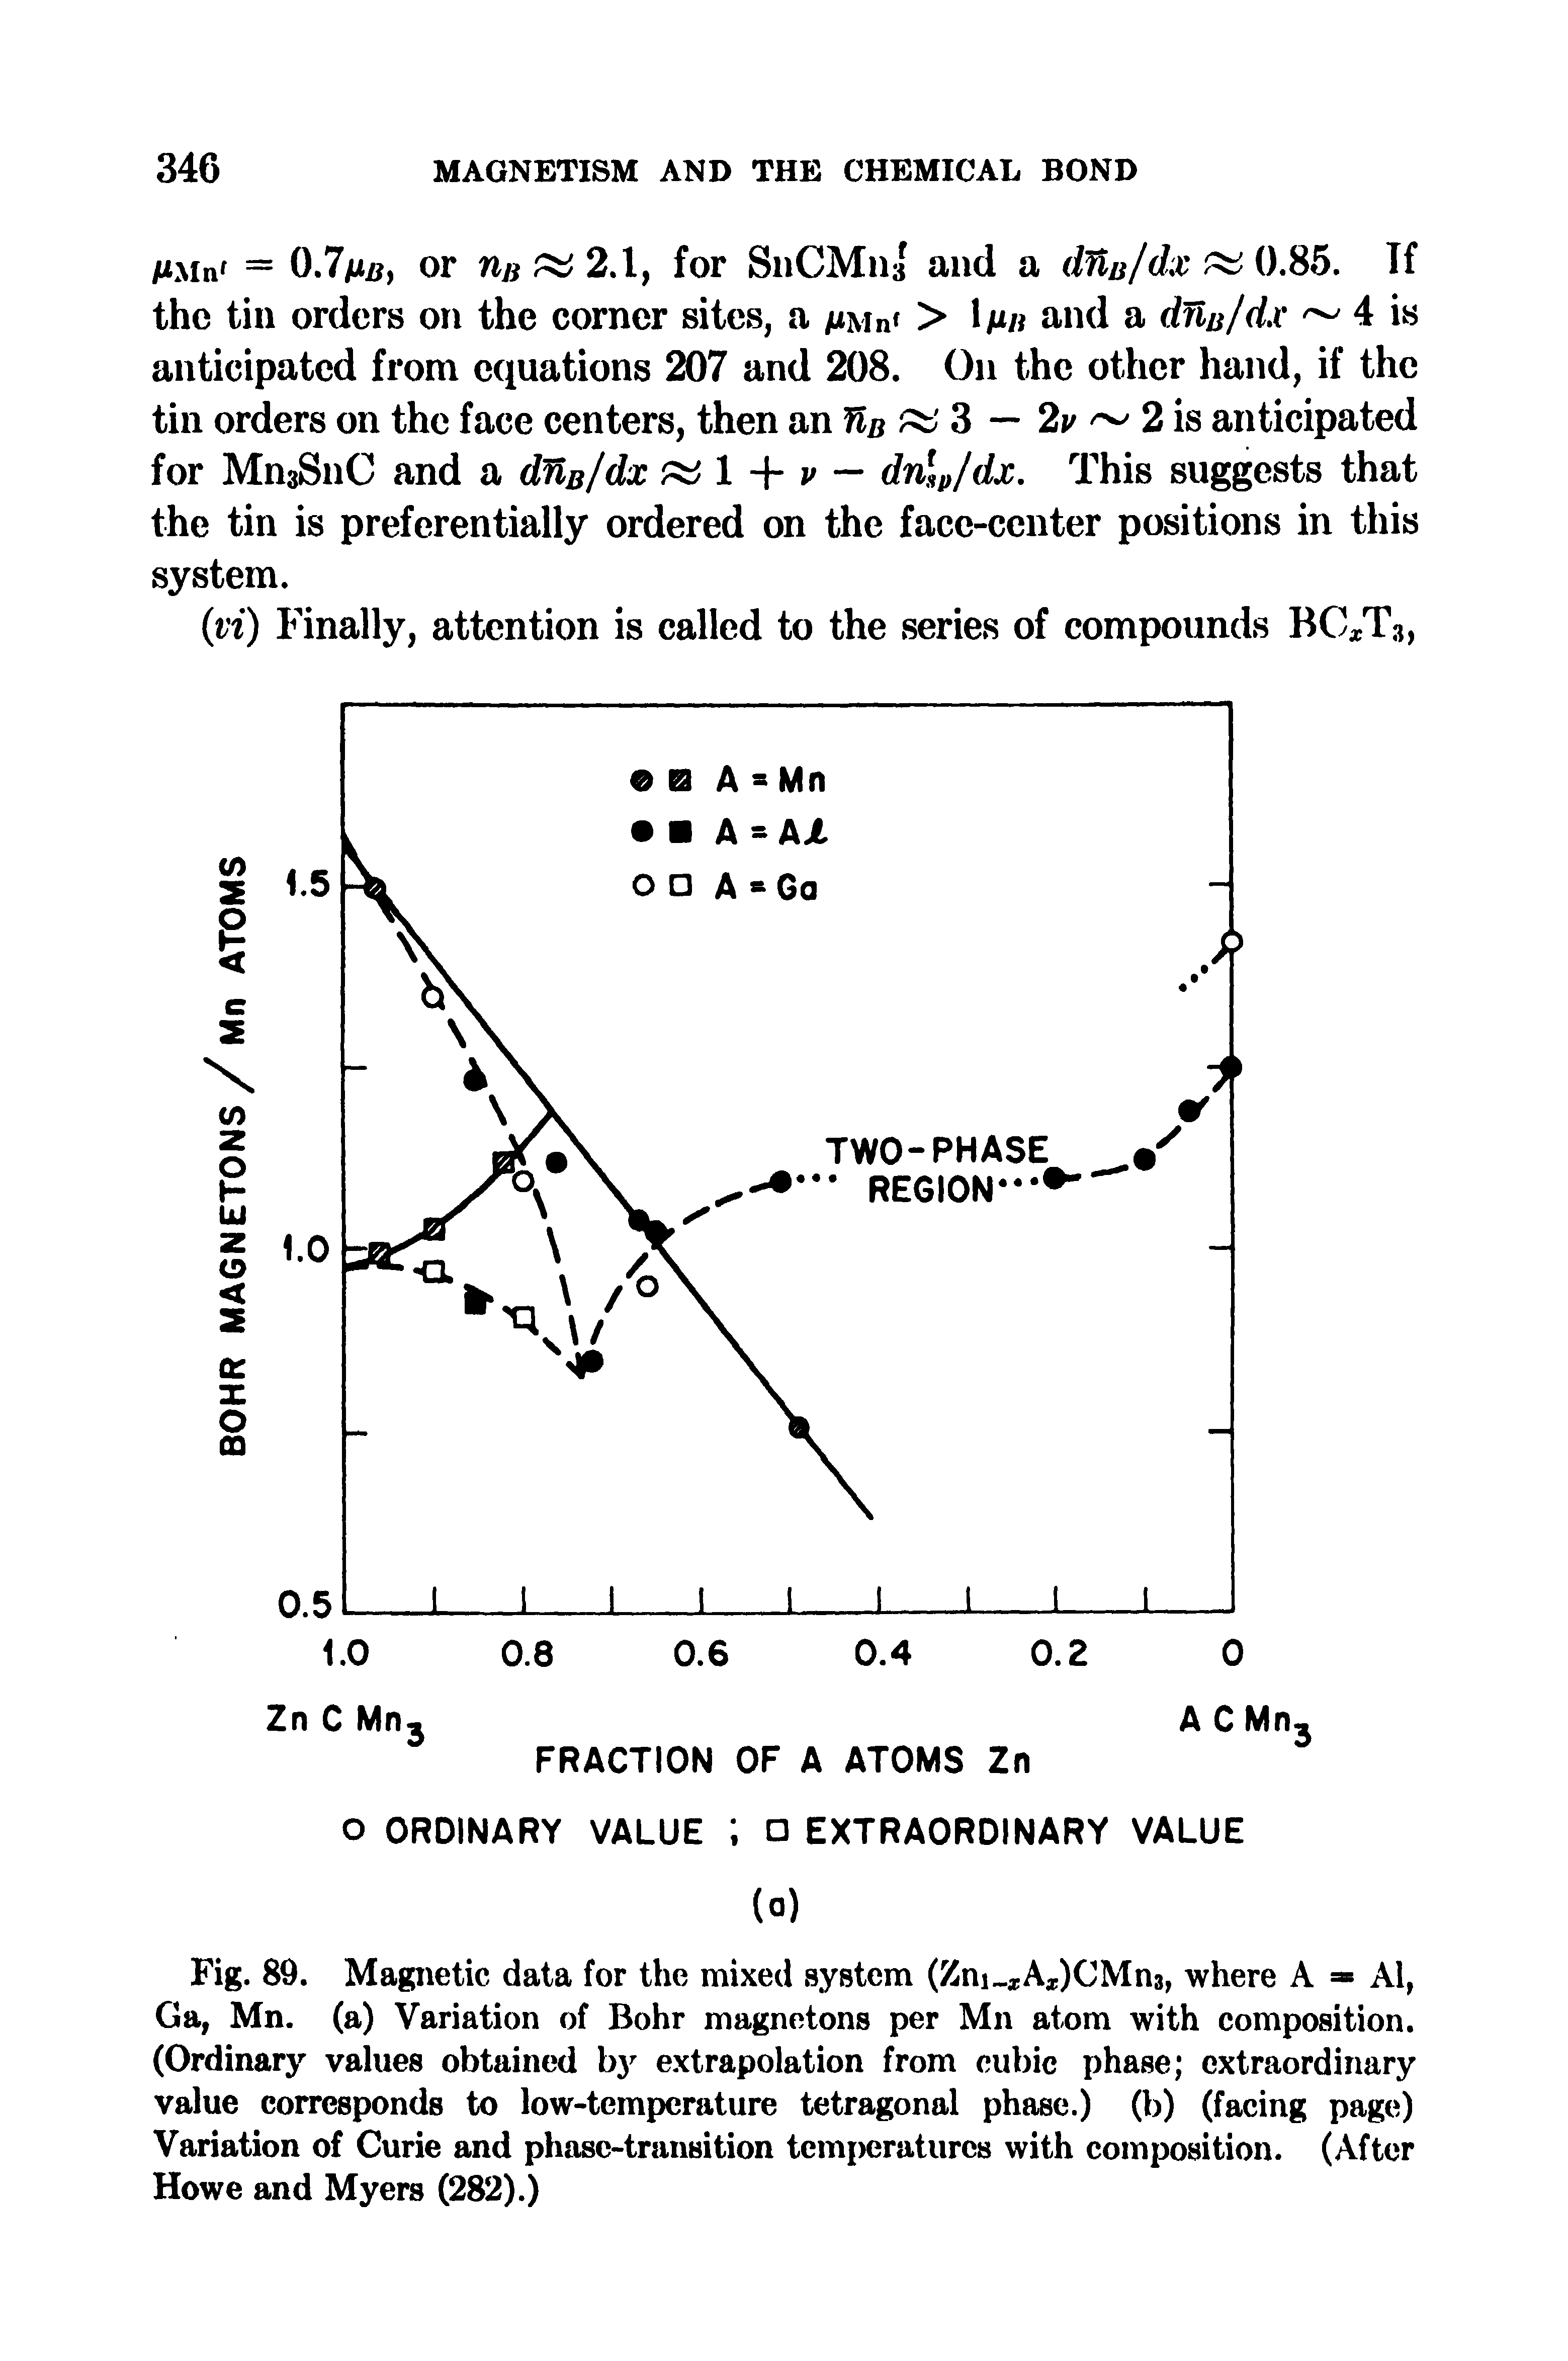 Fig. 89. Magnetic data for the mixed system (Zni Ax)CMns, where A Al, Ga, Mn. (a) Variation of Bohr magnetons per Mn atom with composition. (Ordinary values obtained b r extrapolation from cubic phase extraordinary value corresponds to low-temperature tetragonal phase.) (b) (facing page) Variation of Curie and phase-transition temperatures with composition. (After Howe and Myers (282).)...